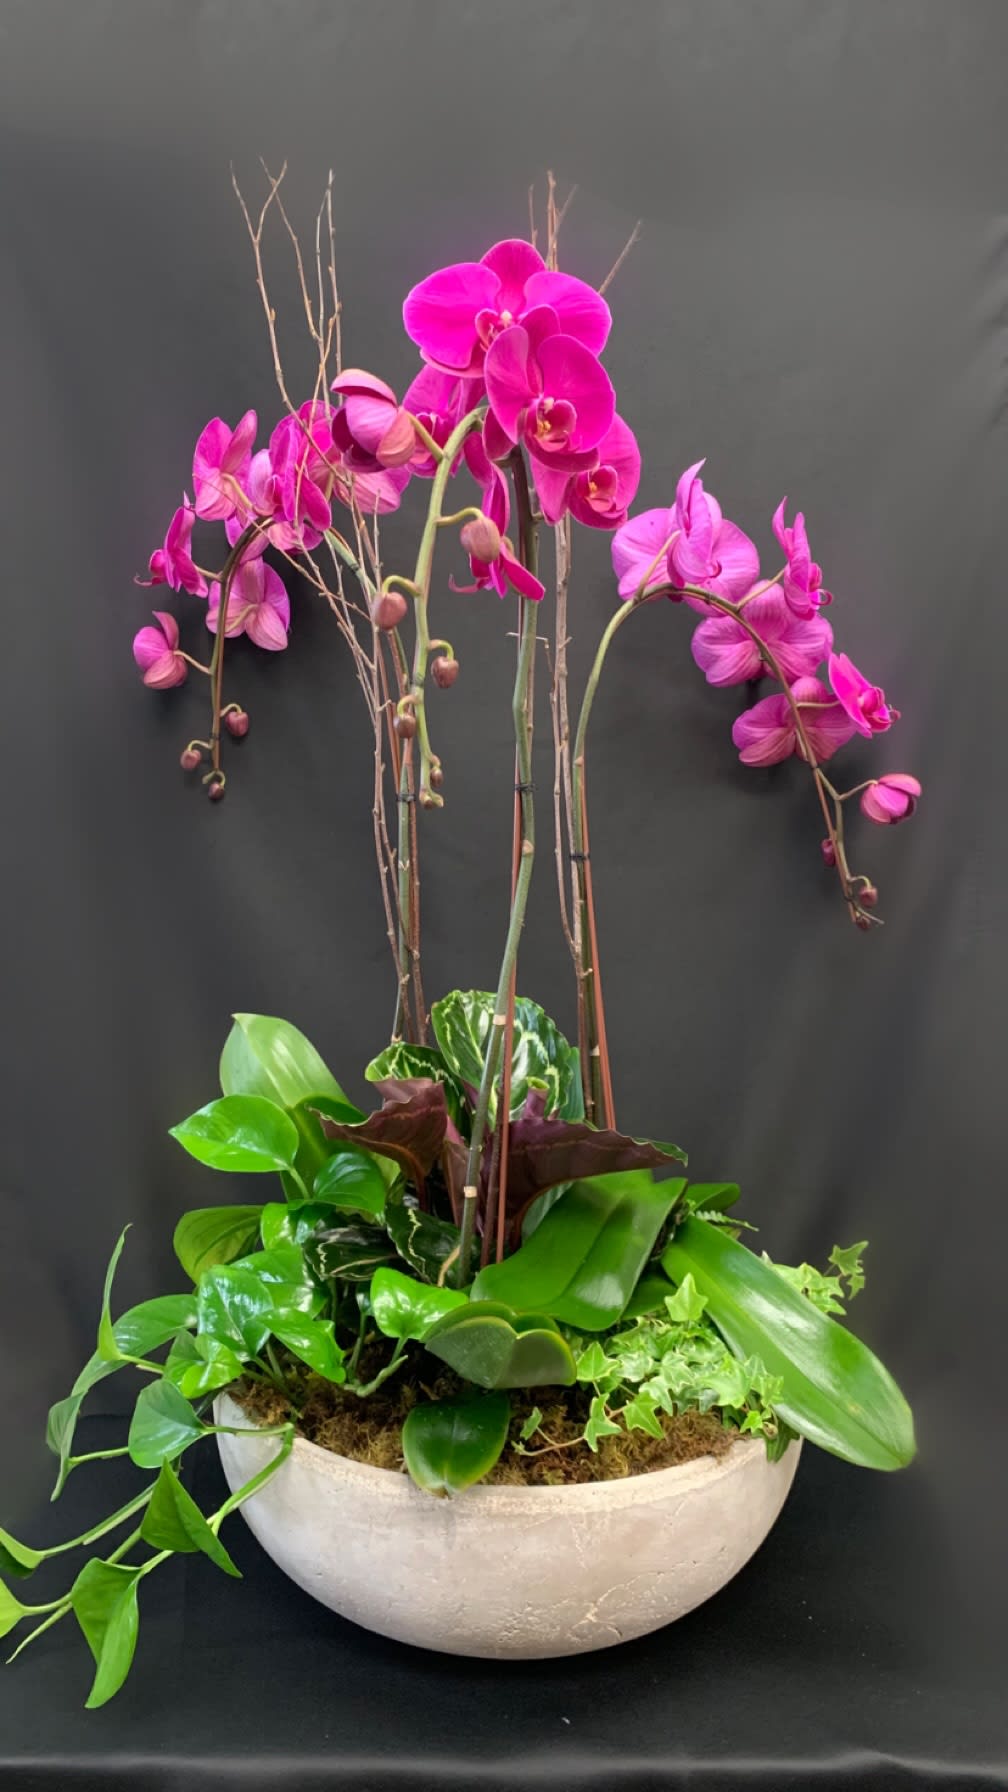 Royal Garden - Three beautiful purple orchids with a variety of green plants in a large round concrete container. A gift for any occasion with a WOW! factor.  